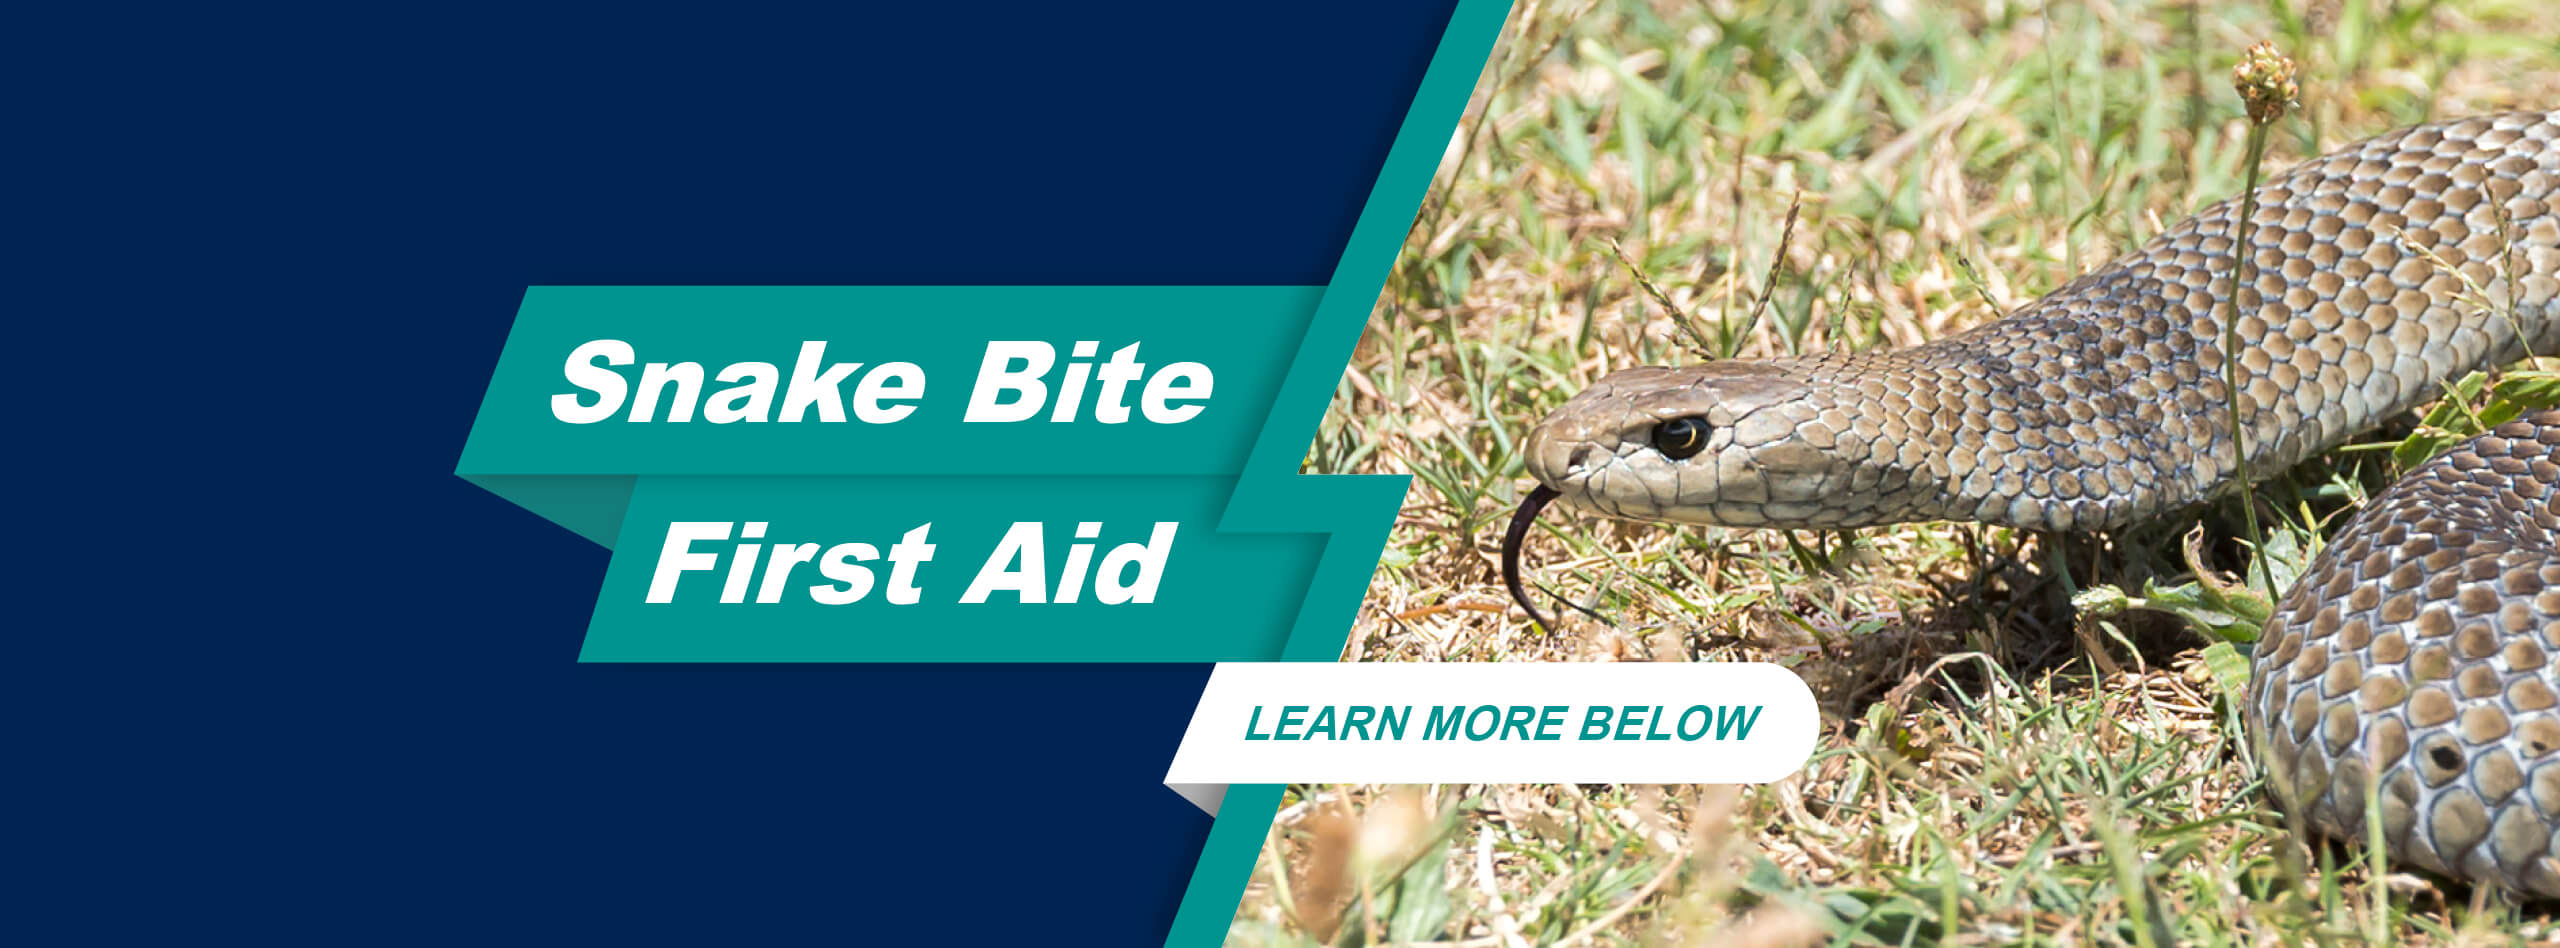 Snake Bite First Aid banner